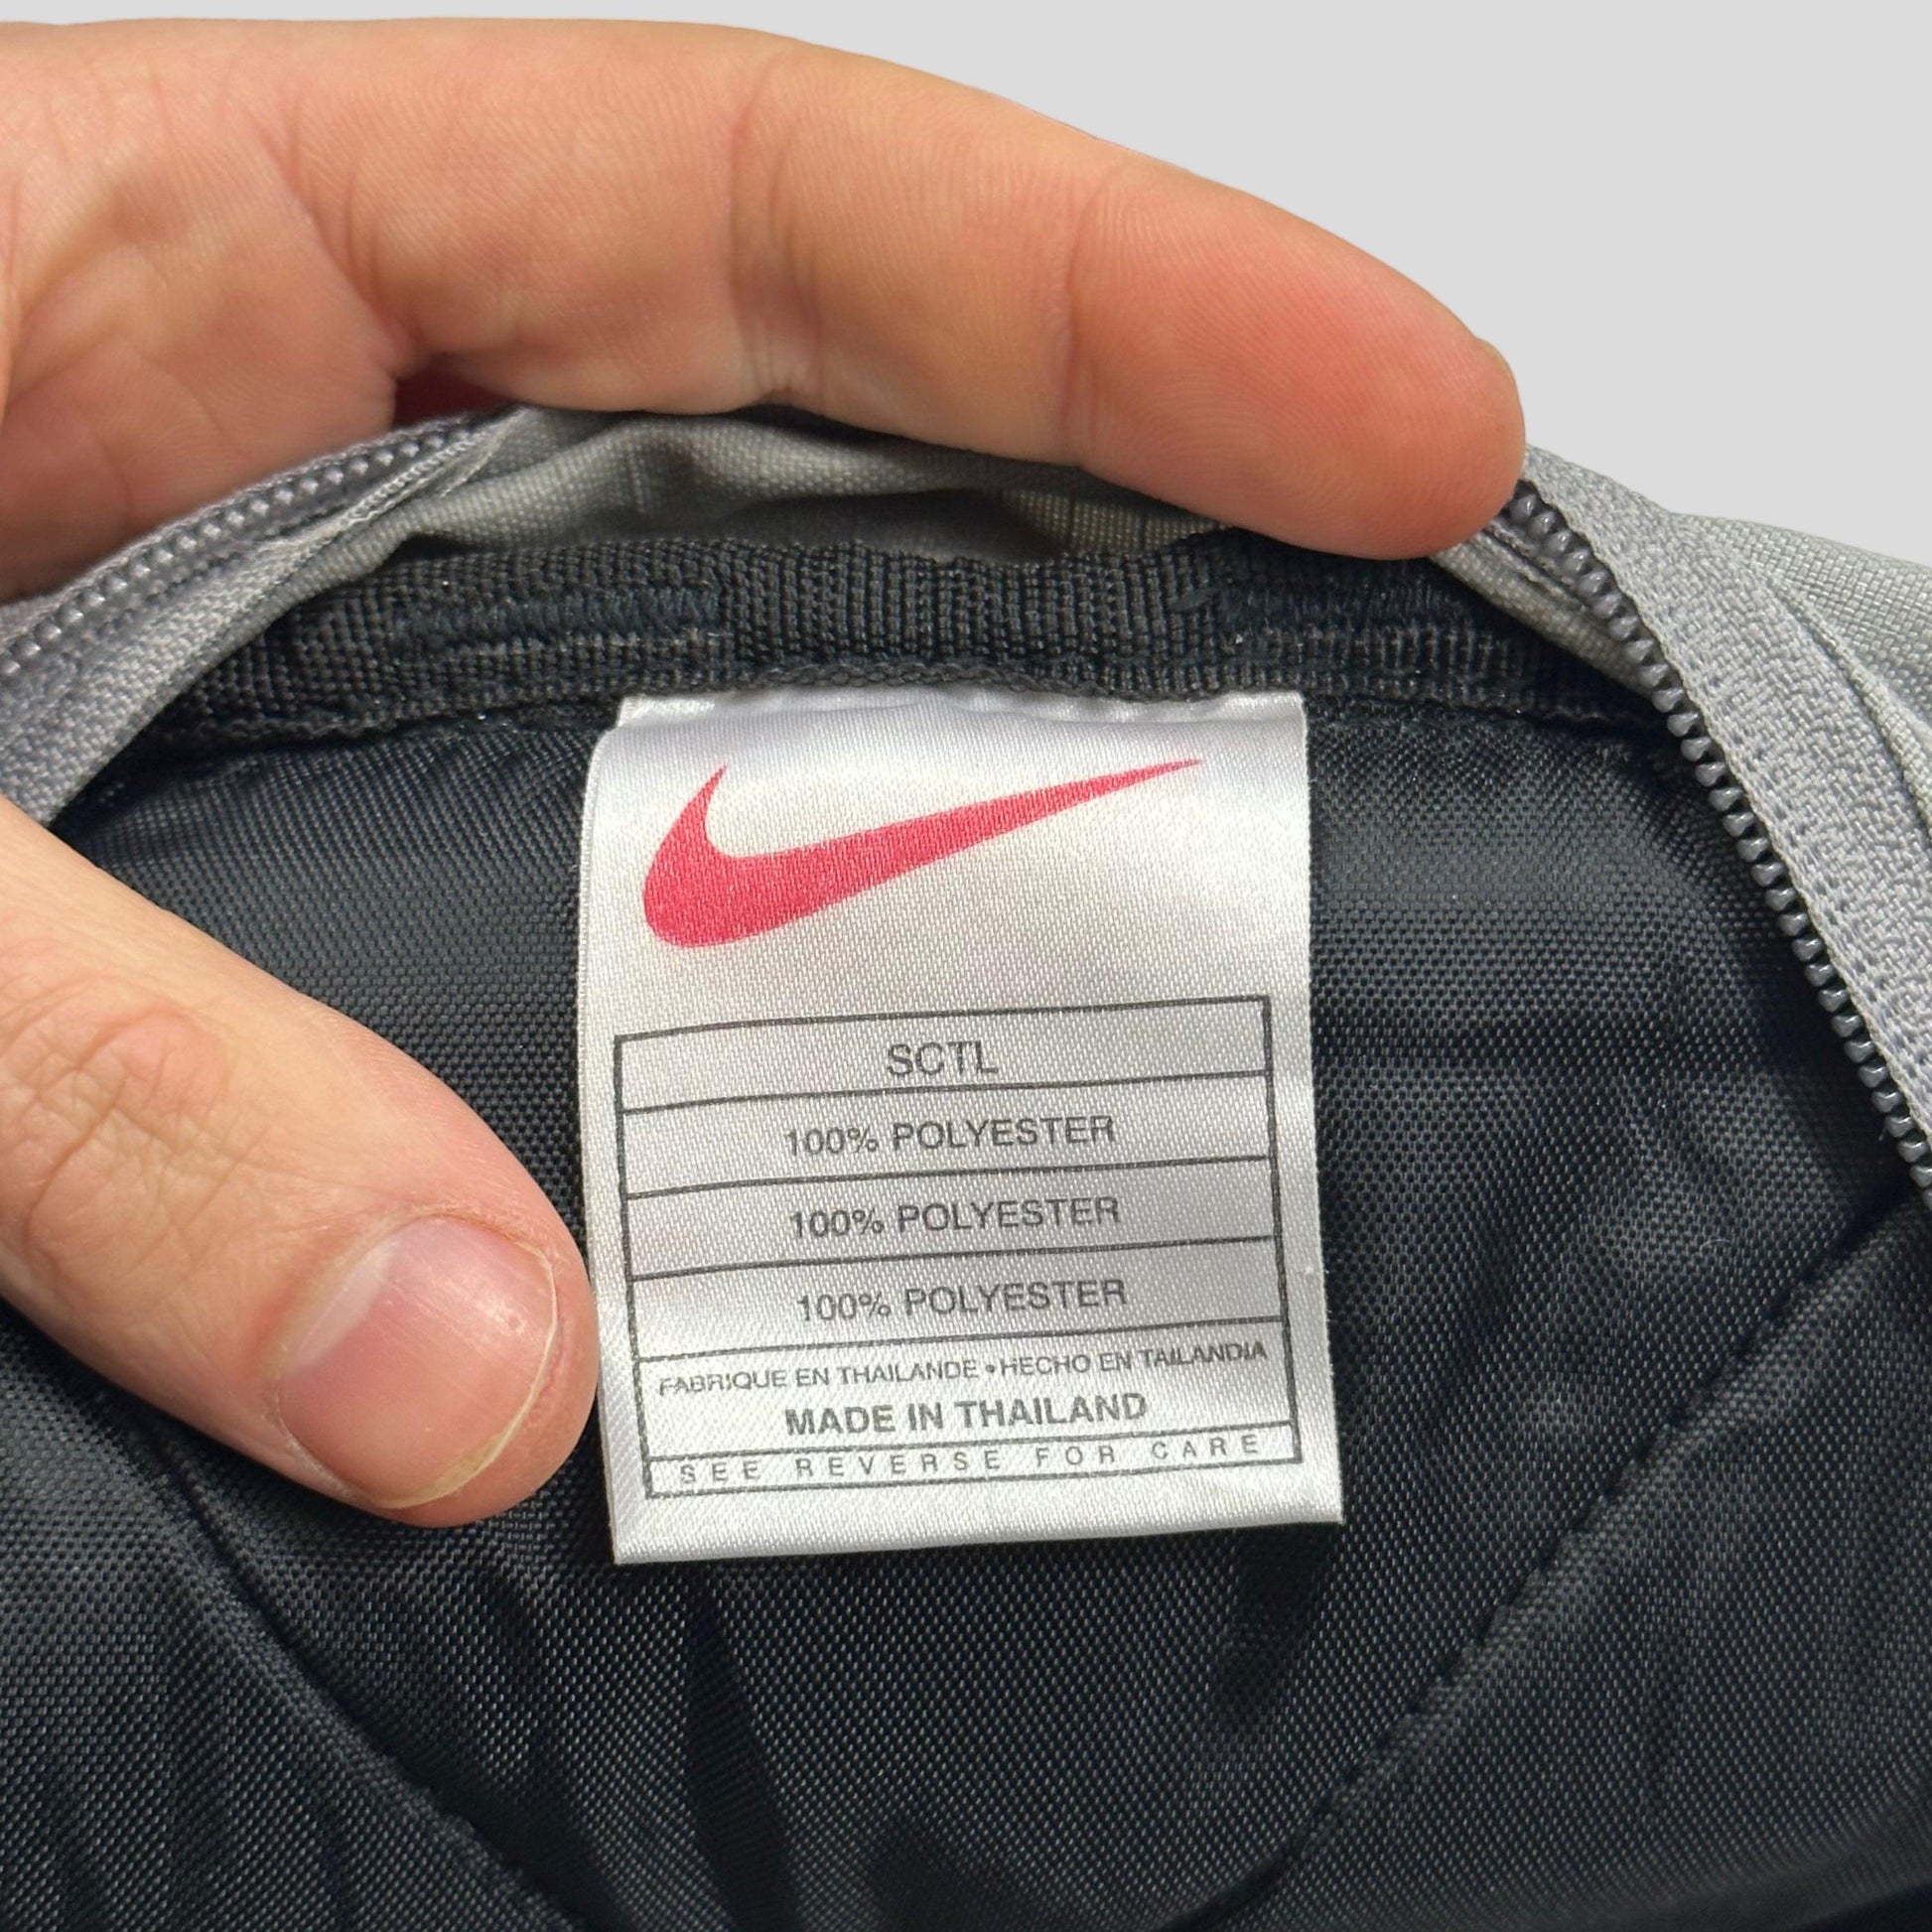 Nike 00’s Ripstop Technical Backpack Sling - Known Source